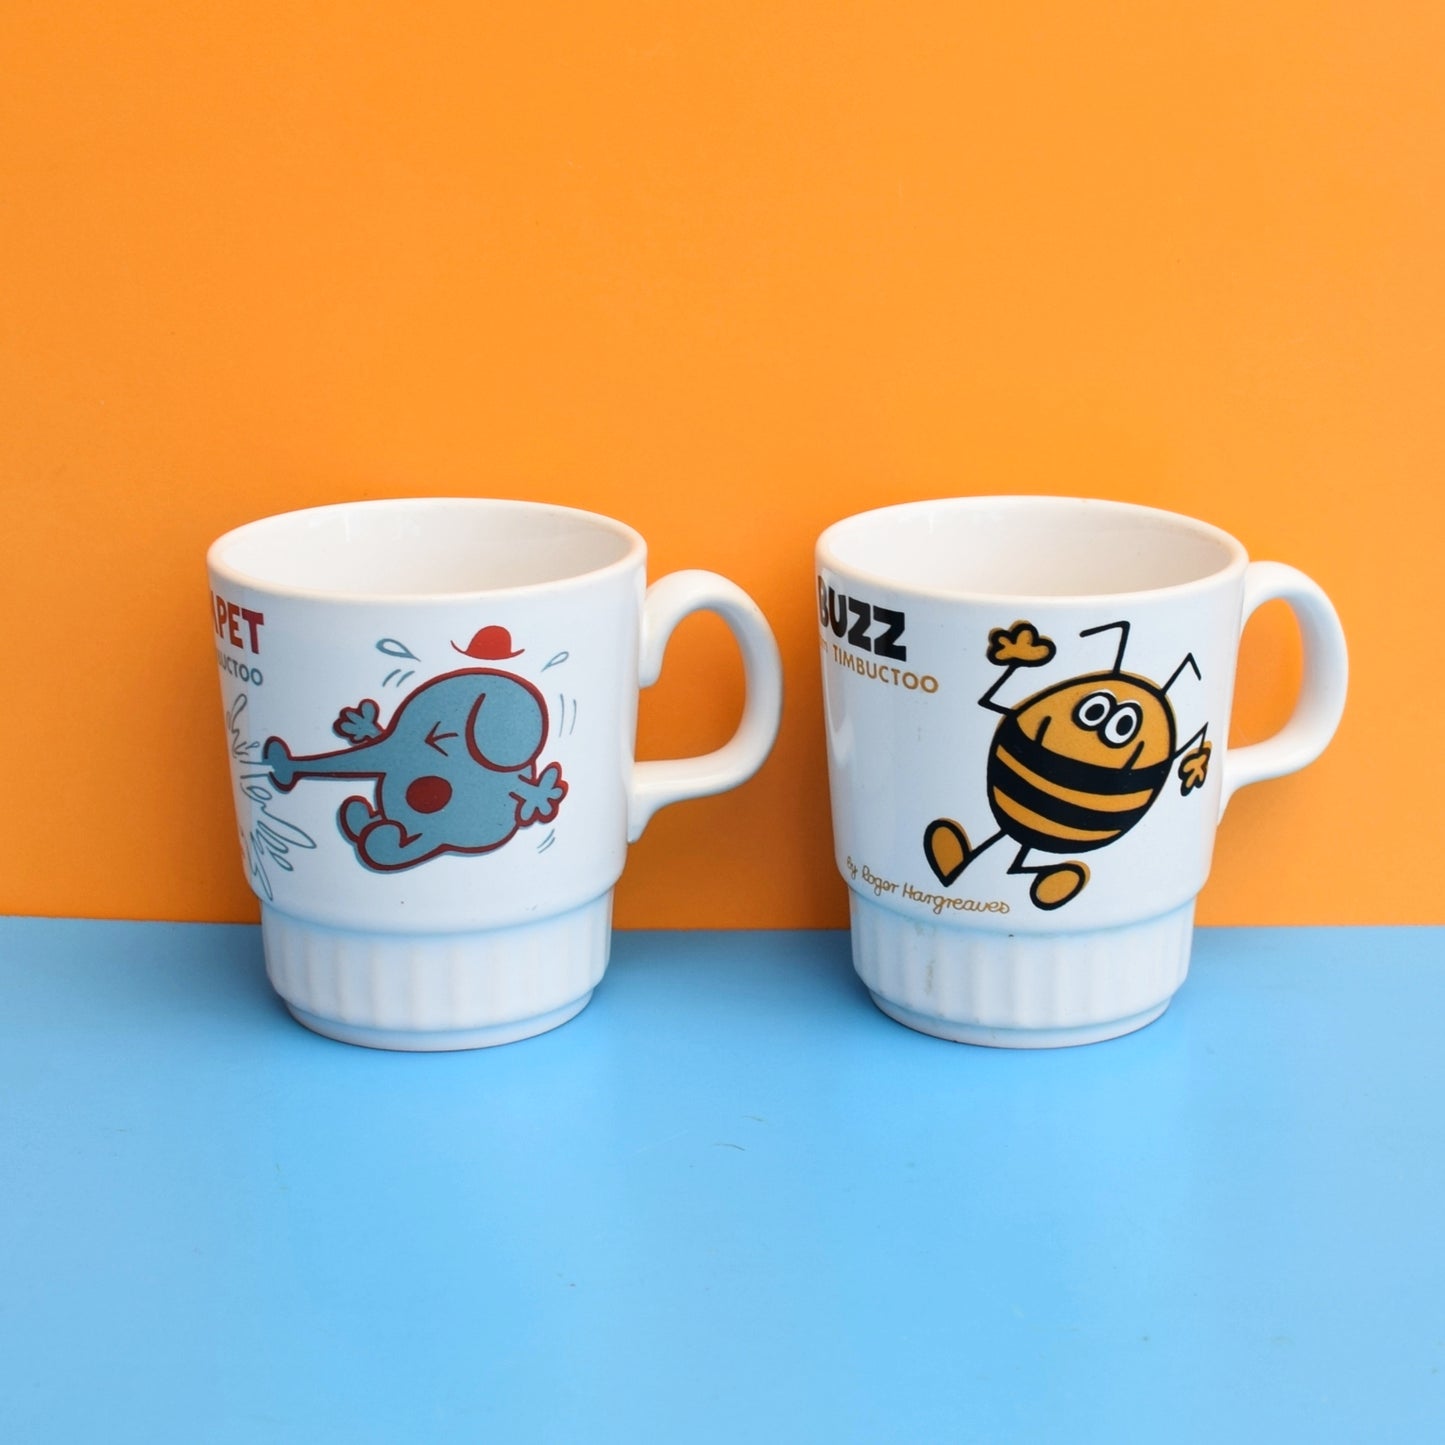 Vintage 1970s Timbuctoo Mugs - Buzz & Trumpet